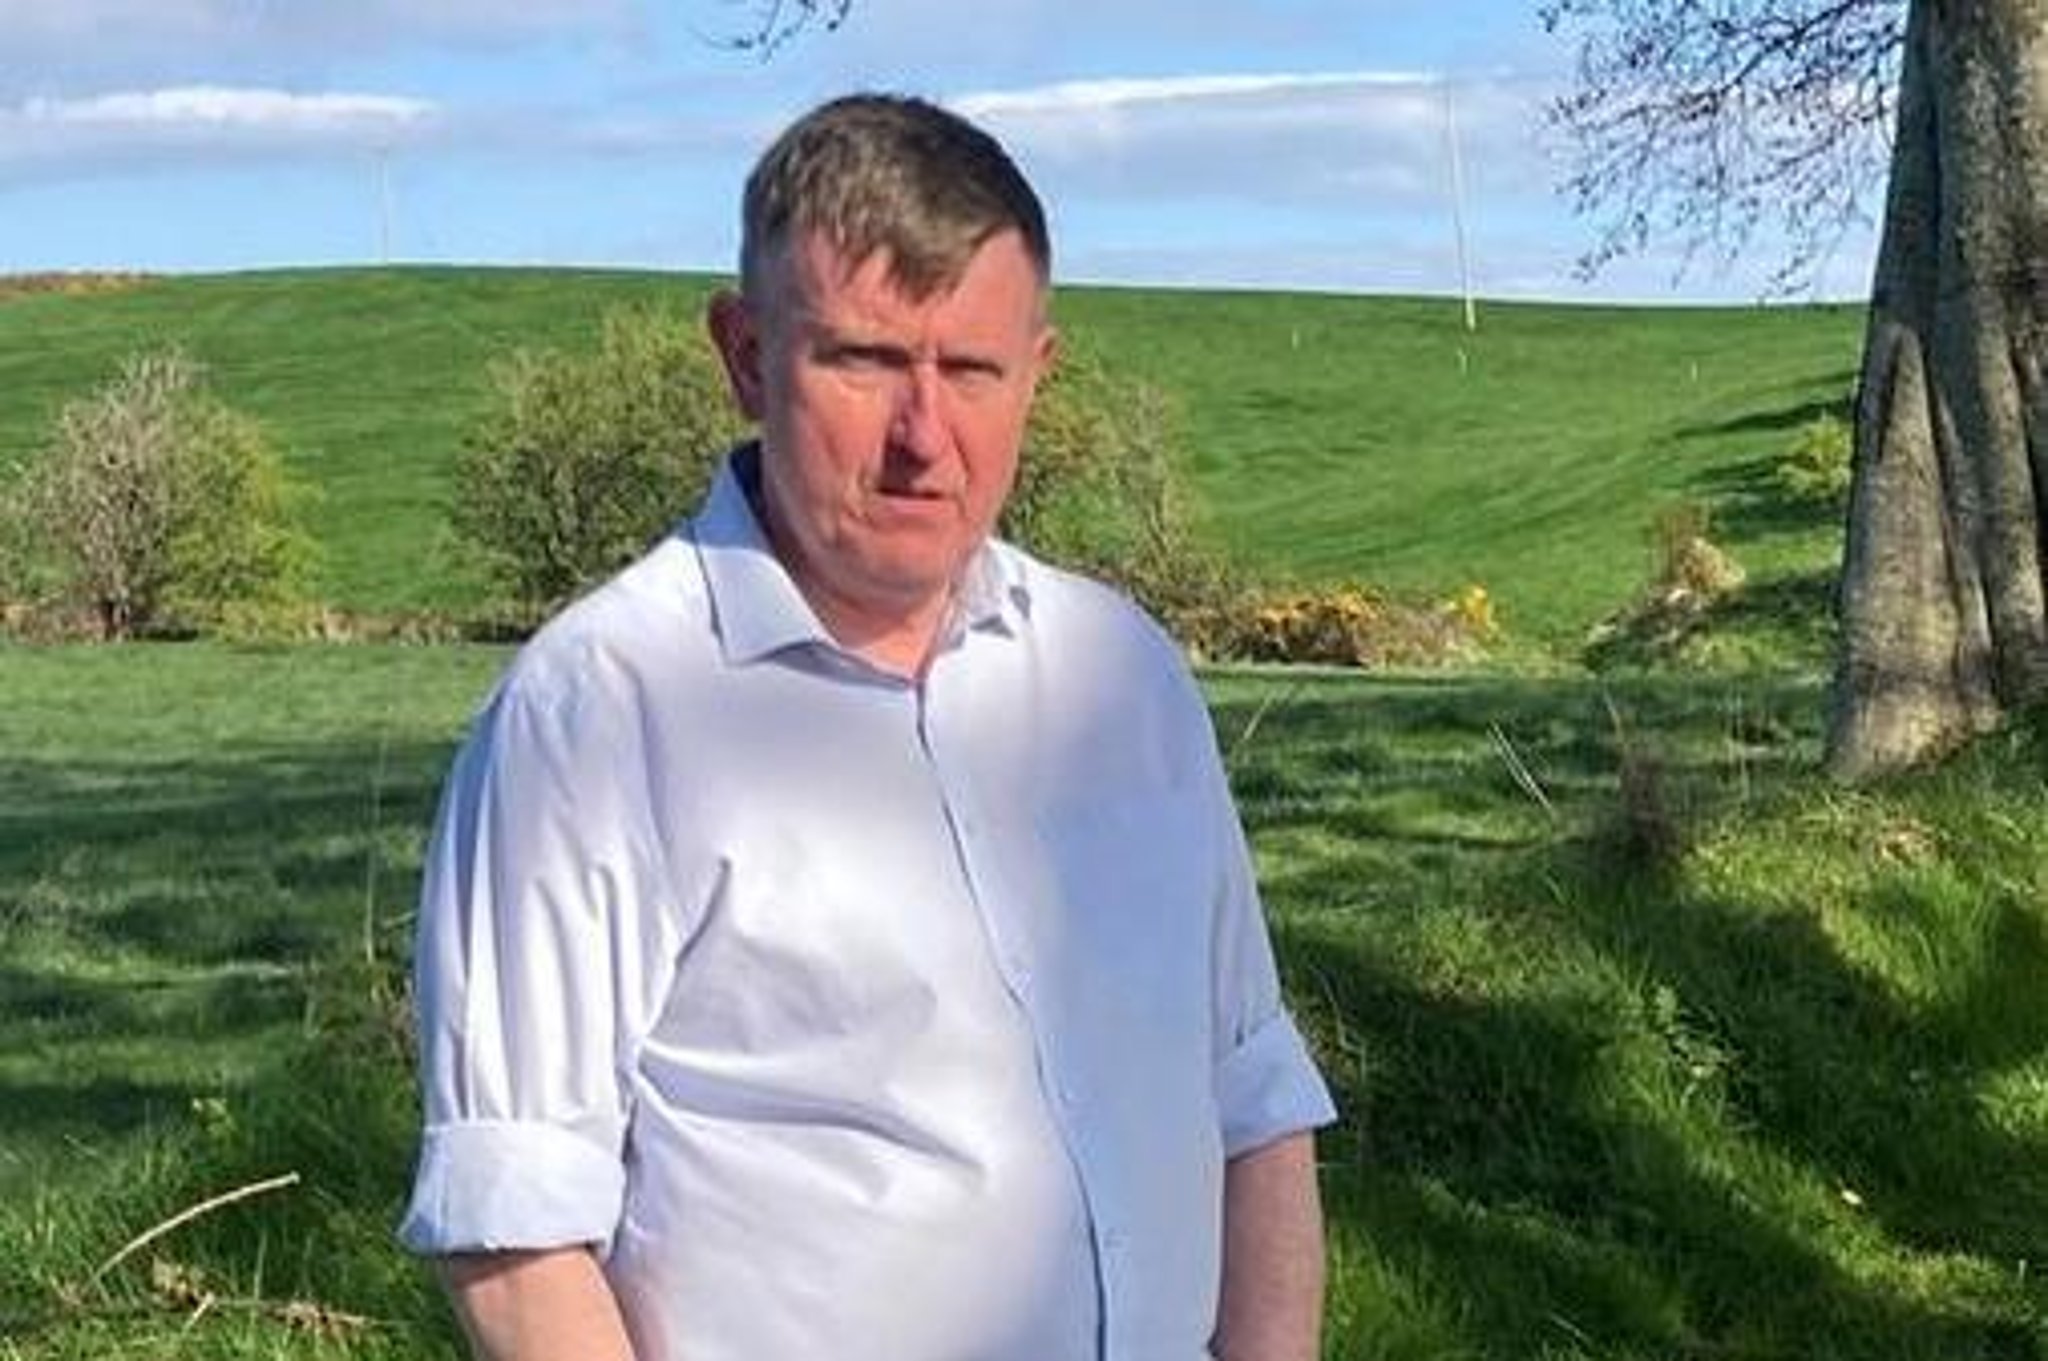 ELECTION 2022: WATCH – DUP man signals united unionist party may be on the cards